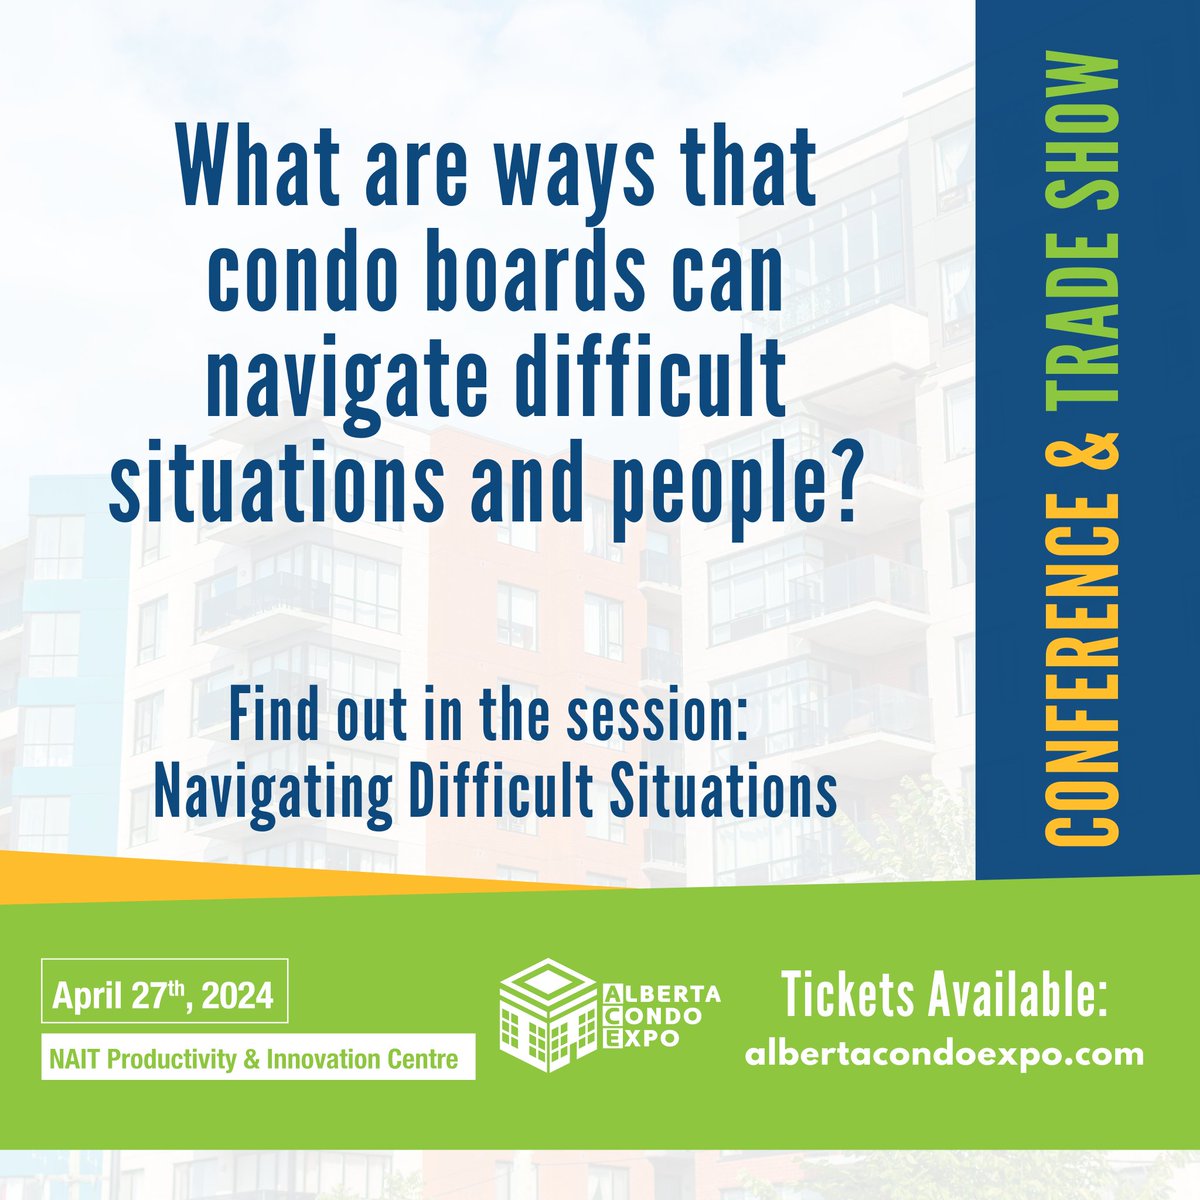 Calling all condo decision-makers! Don't miss out on the Alberta Condo Expo where you can discover cutting-edge solutions and connect with fellow industry leaders. Reserve your seat now! #AlbertaCondoExpo2024 eventbrite.ca/e/2024-alberta…